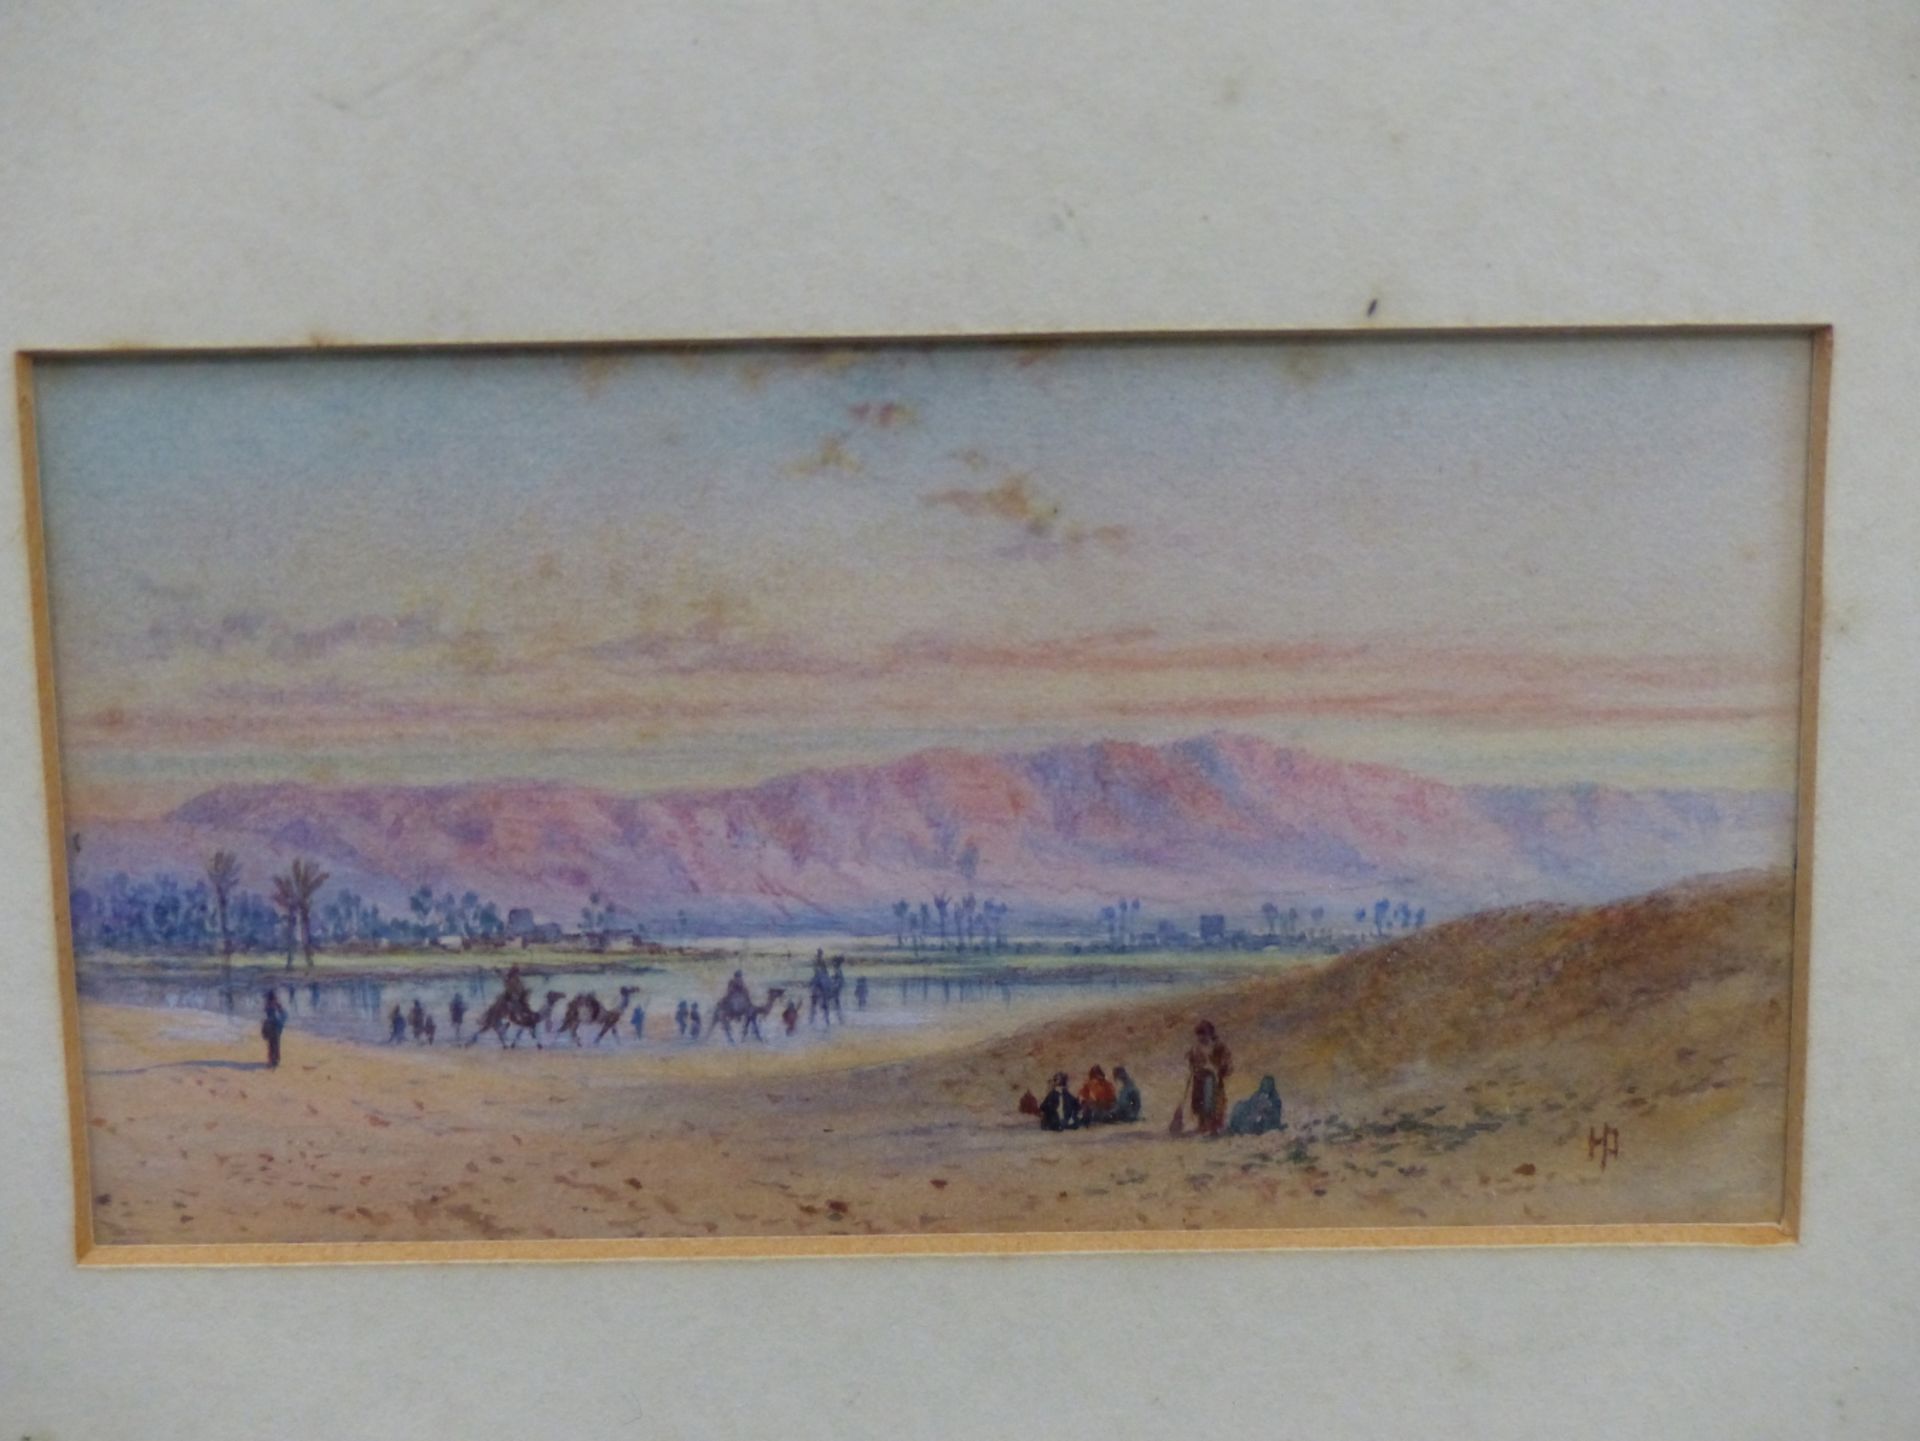 HENRY PILLEAU (1813-1899), THE MOCATTAM MOUNTAINS NEAR CAIRO, EGYPT, SIGNED WITH MONOGRAM, - Image 5 of 6